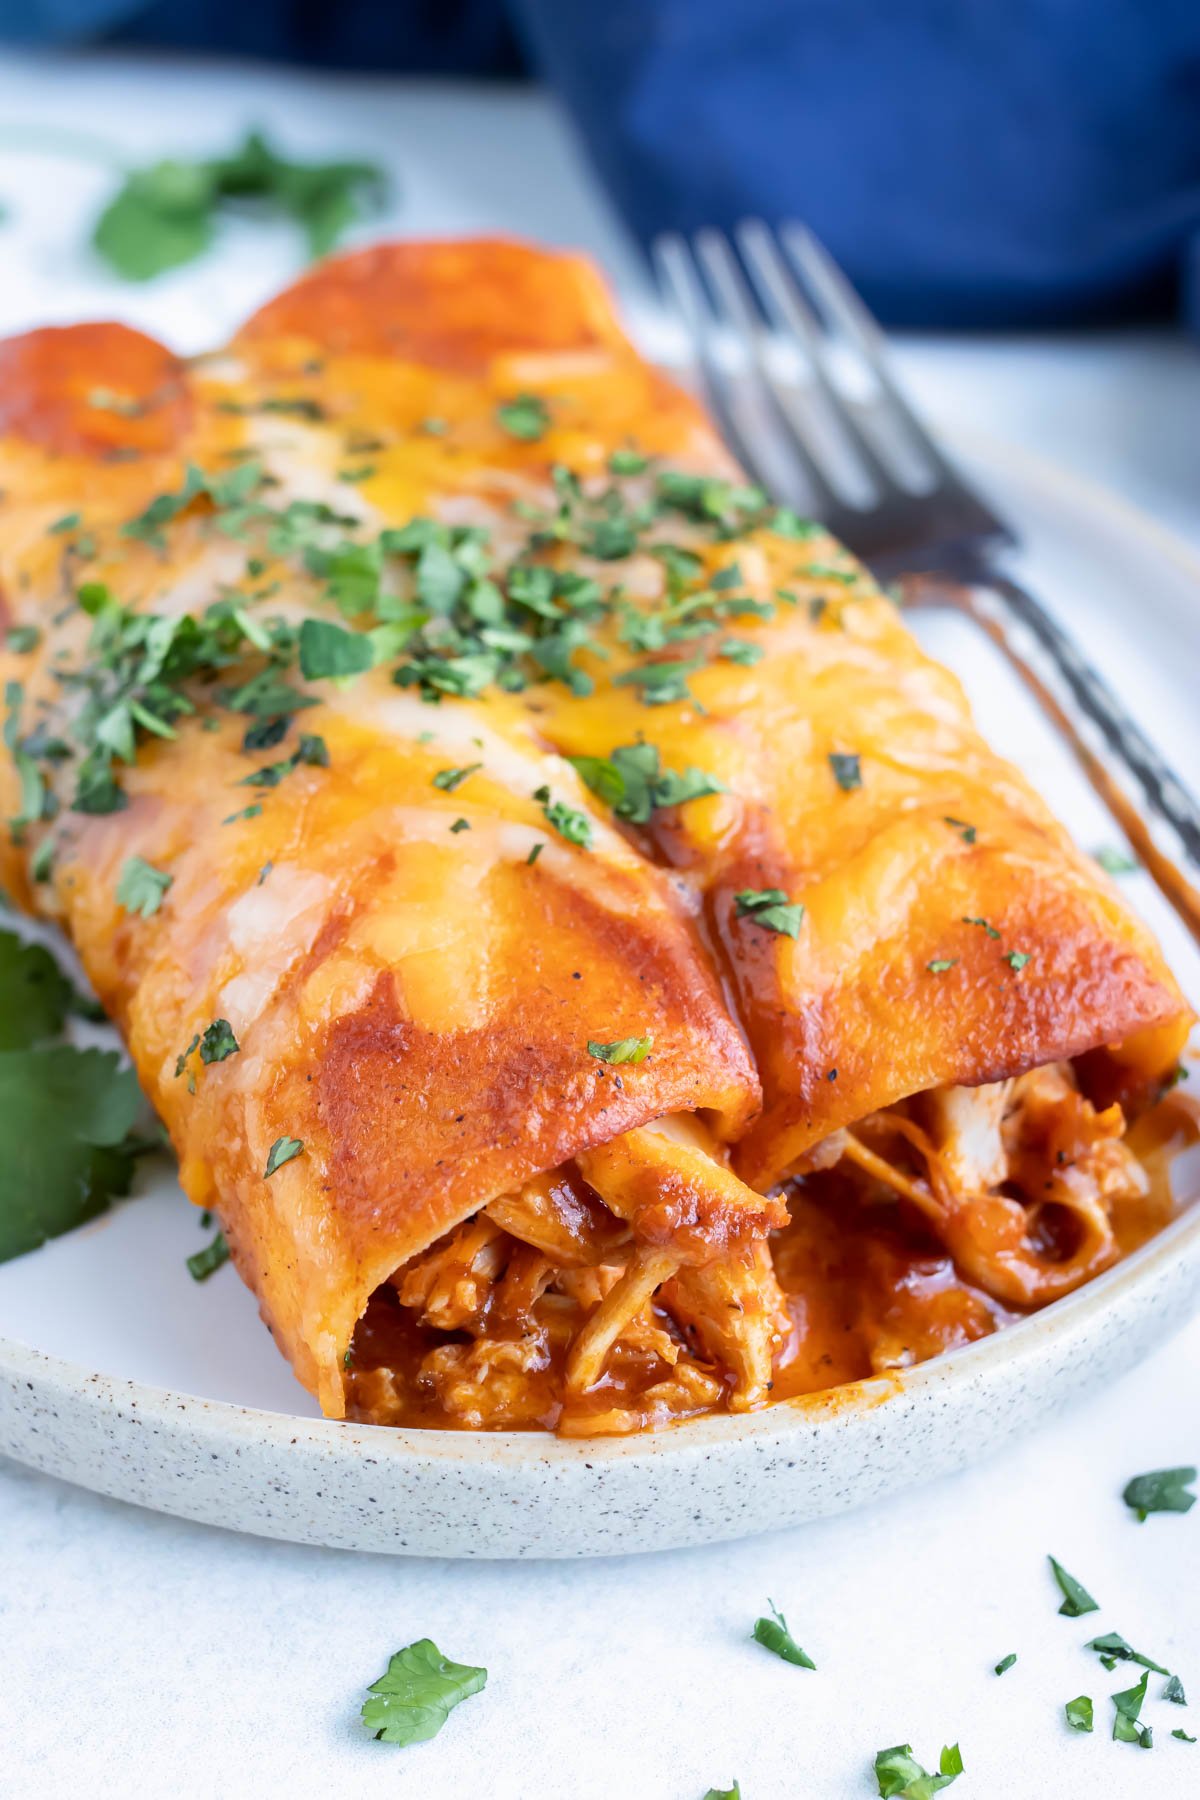 A classic and authentic Mexican enchilada recipe with shredded chicken and cheddar cheese that is topped with cilantro.